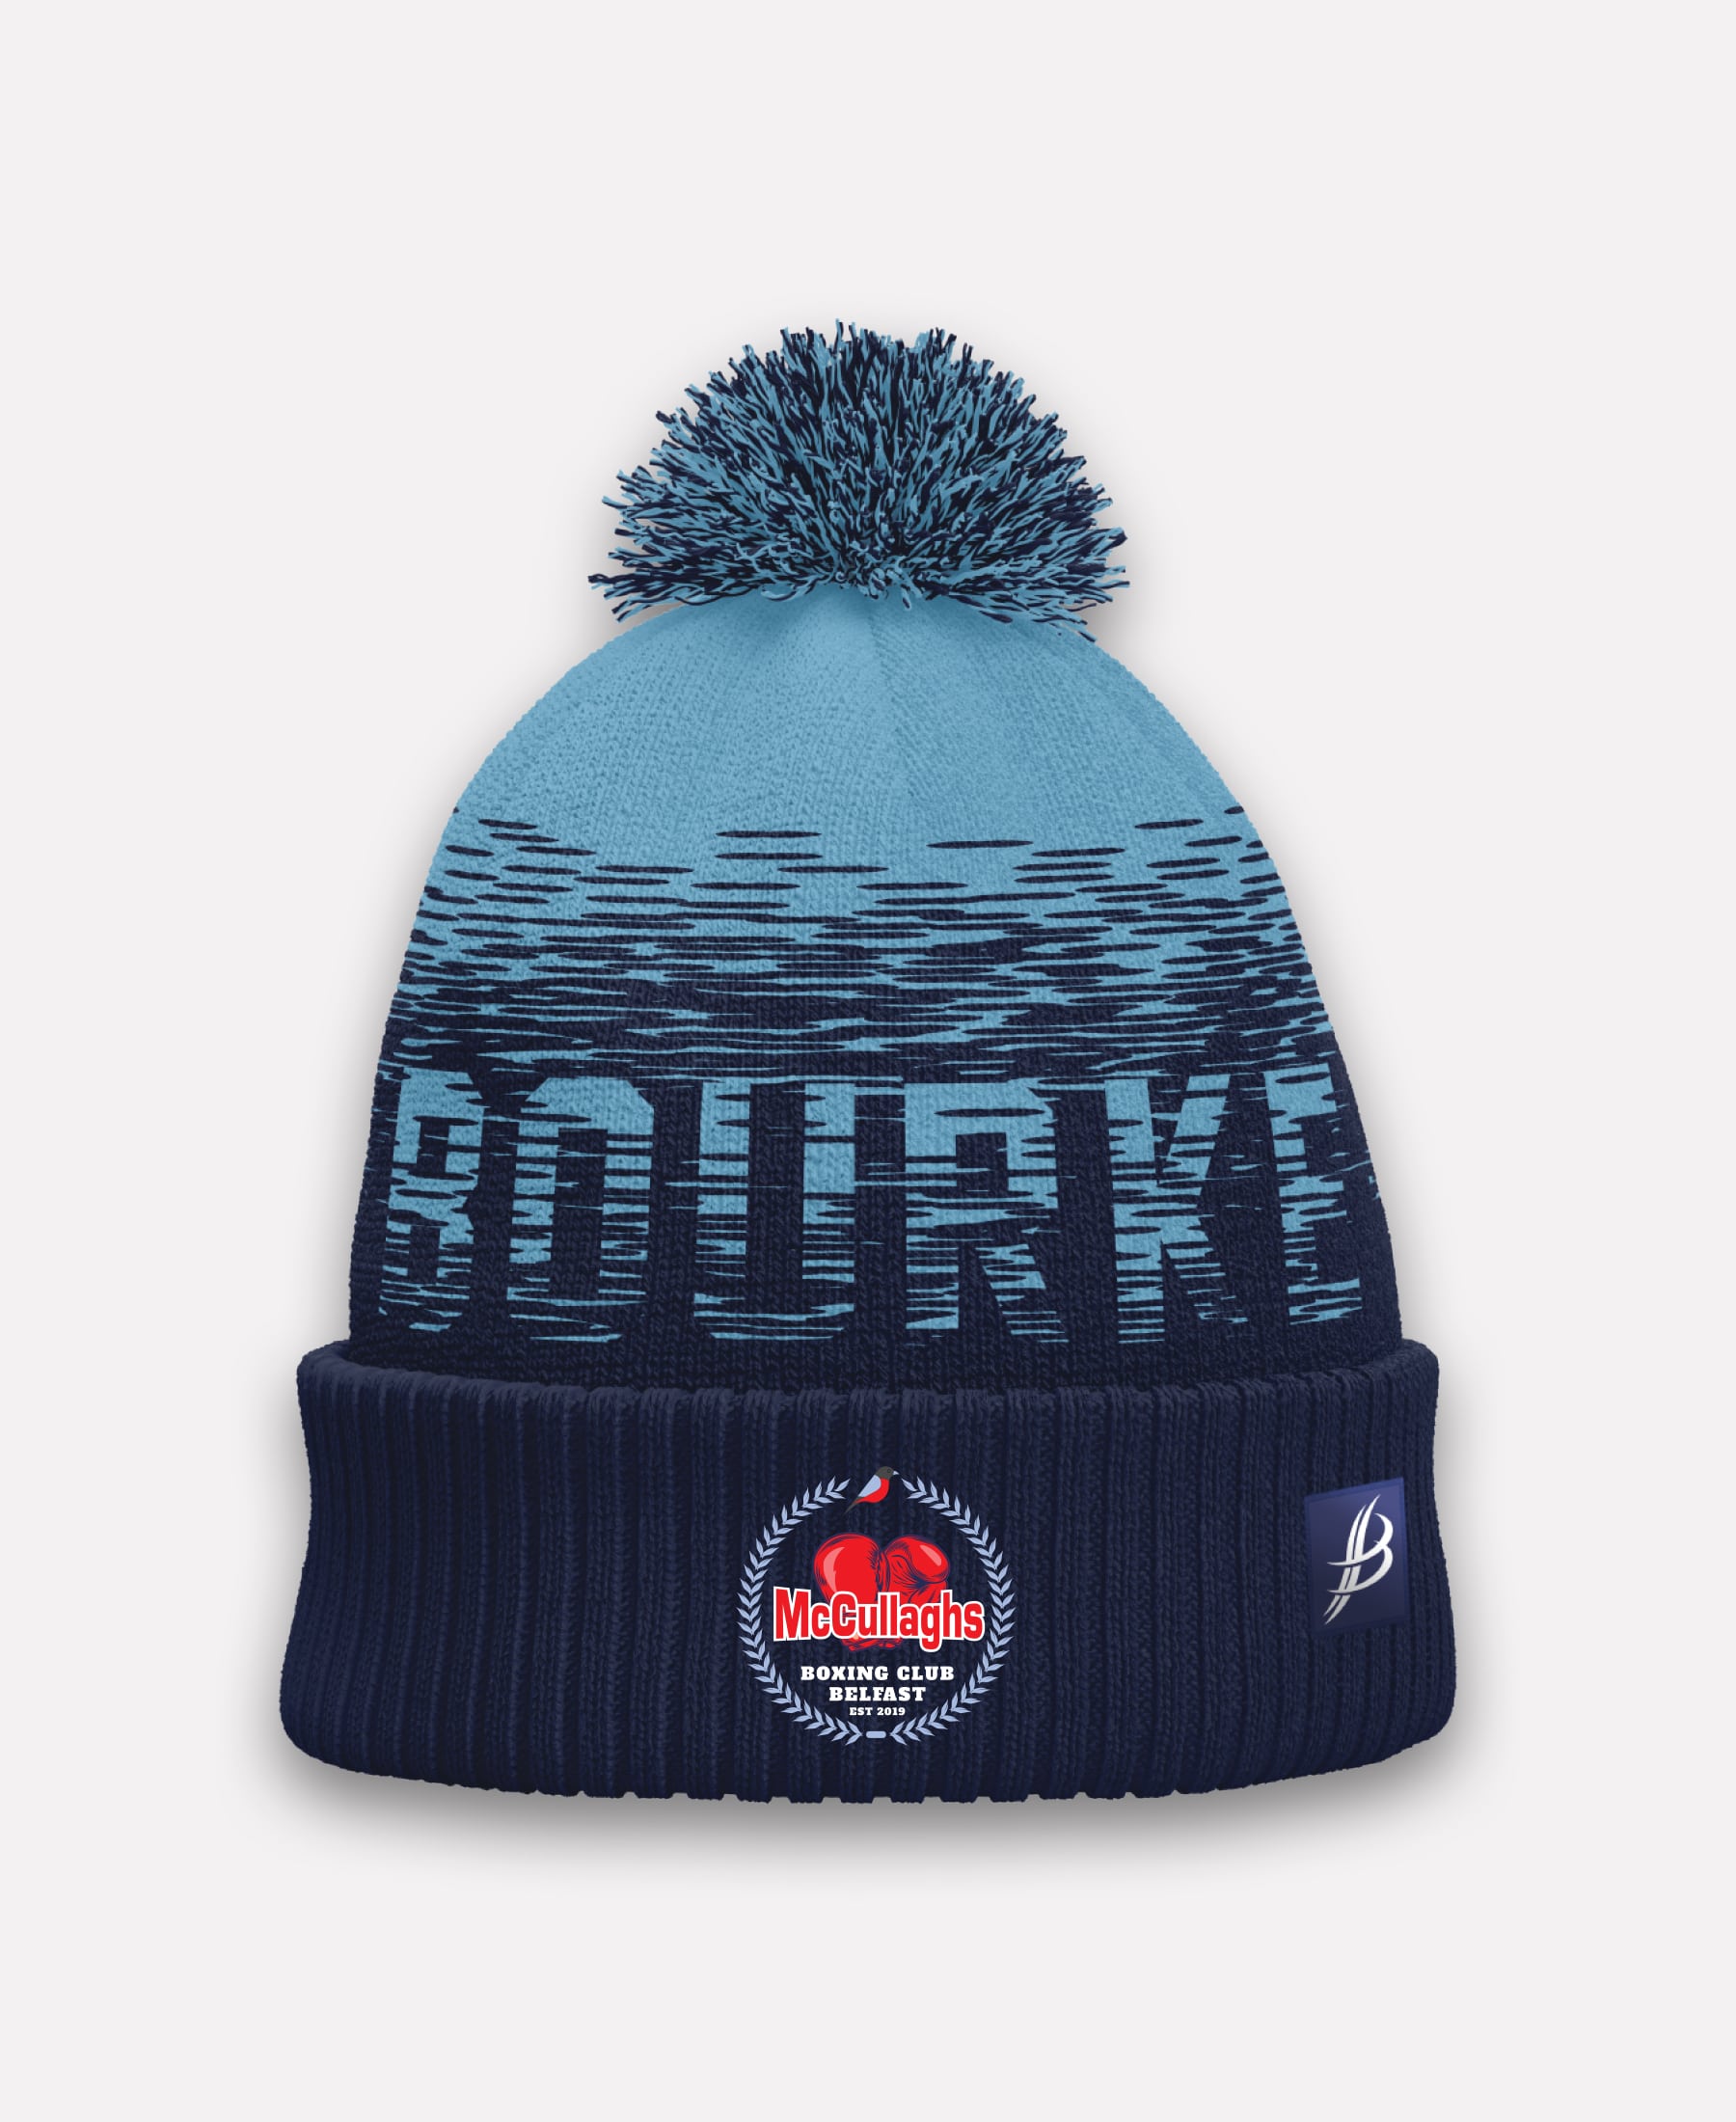 McCullagh Boxing Club TACA Fleece Lined Bobble Hat (Sky/Navy)